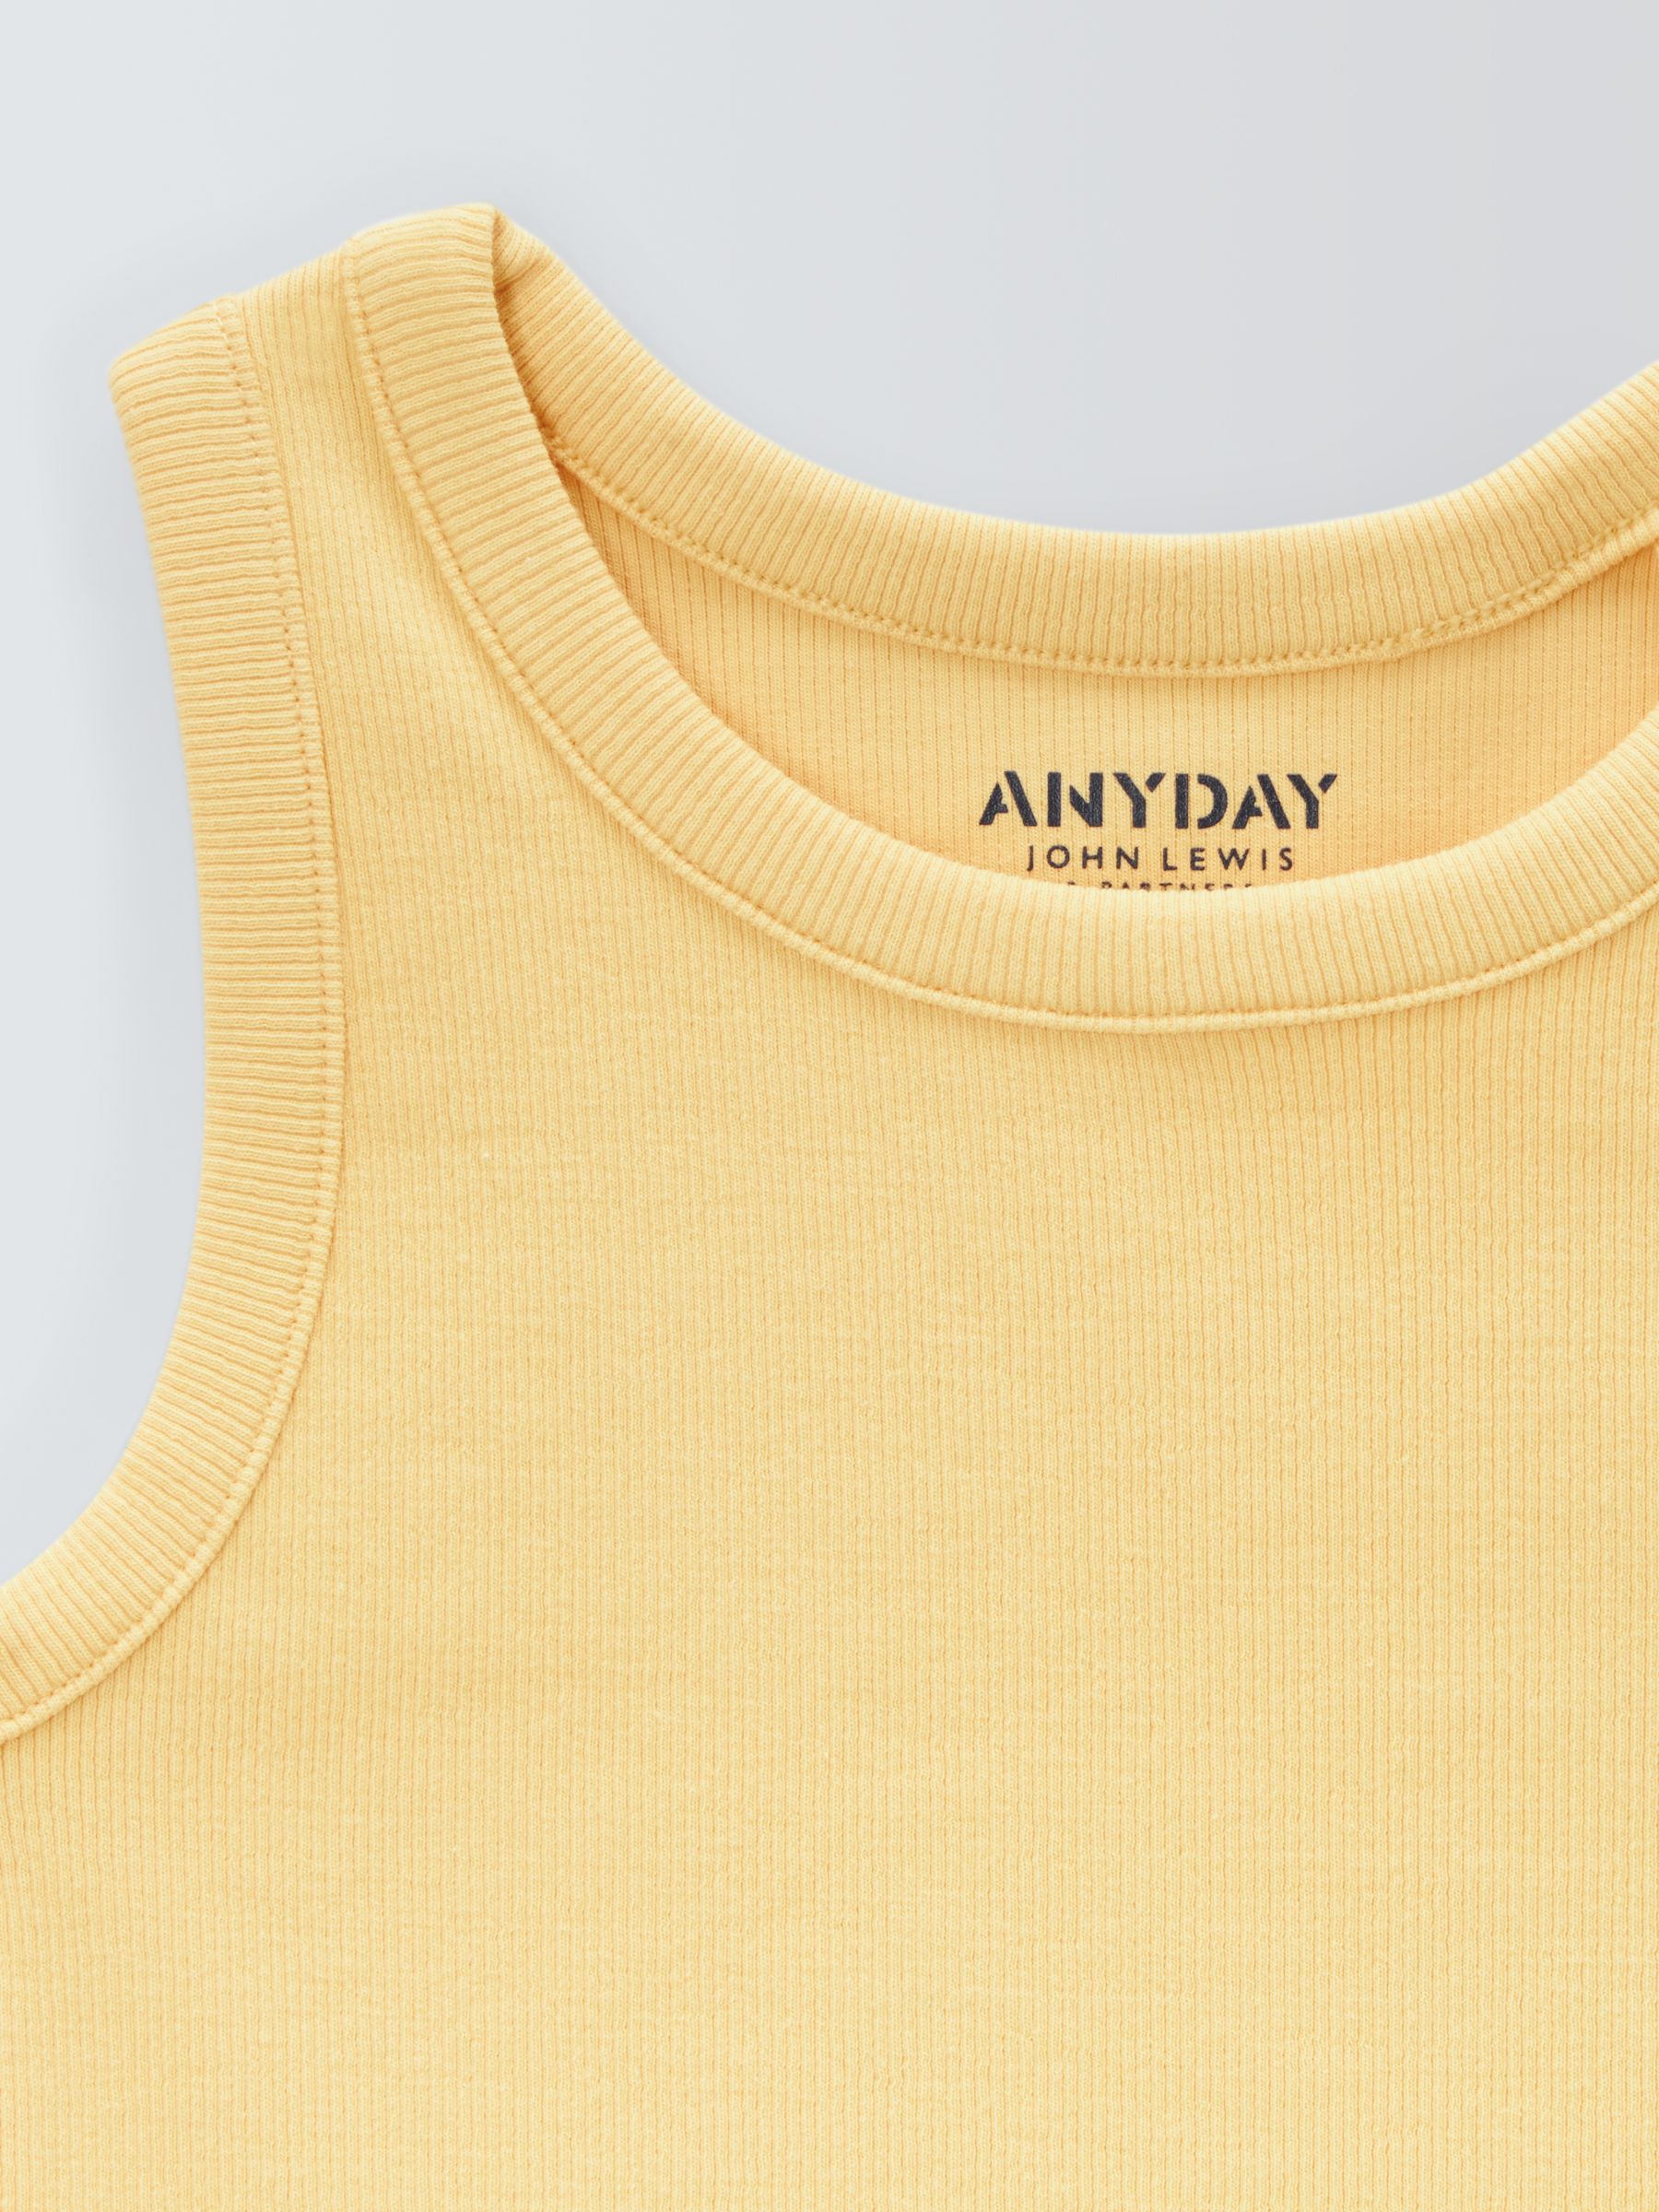 John Lewis ANYDAY Kids' Ribbed Cotton Vest, Sundress, 12 years